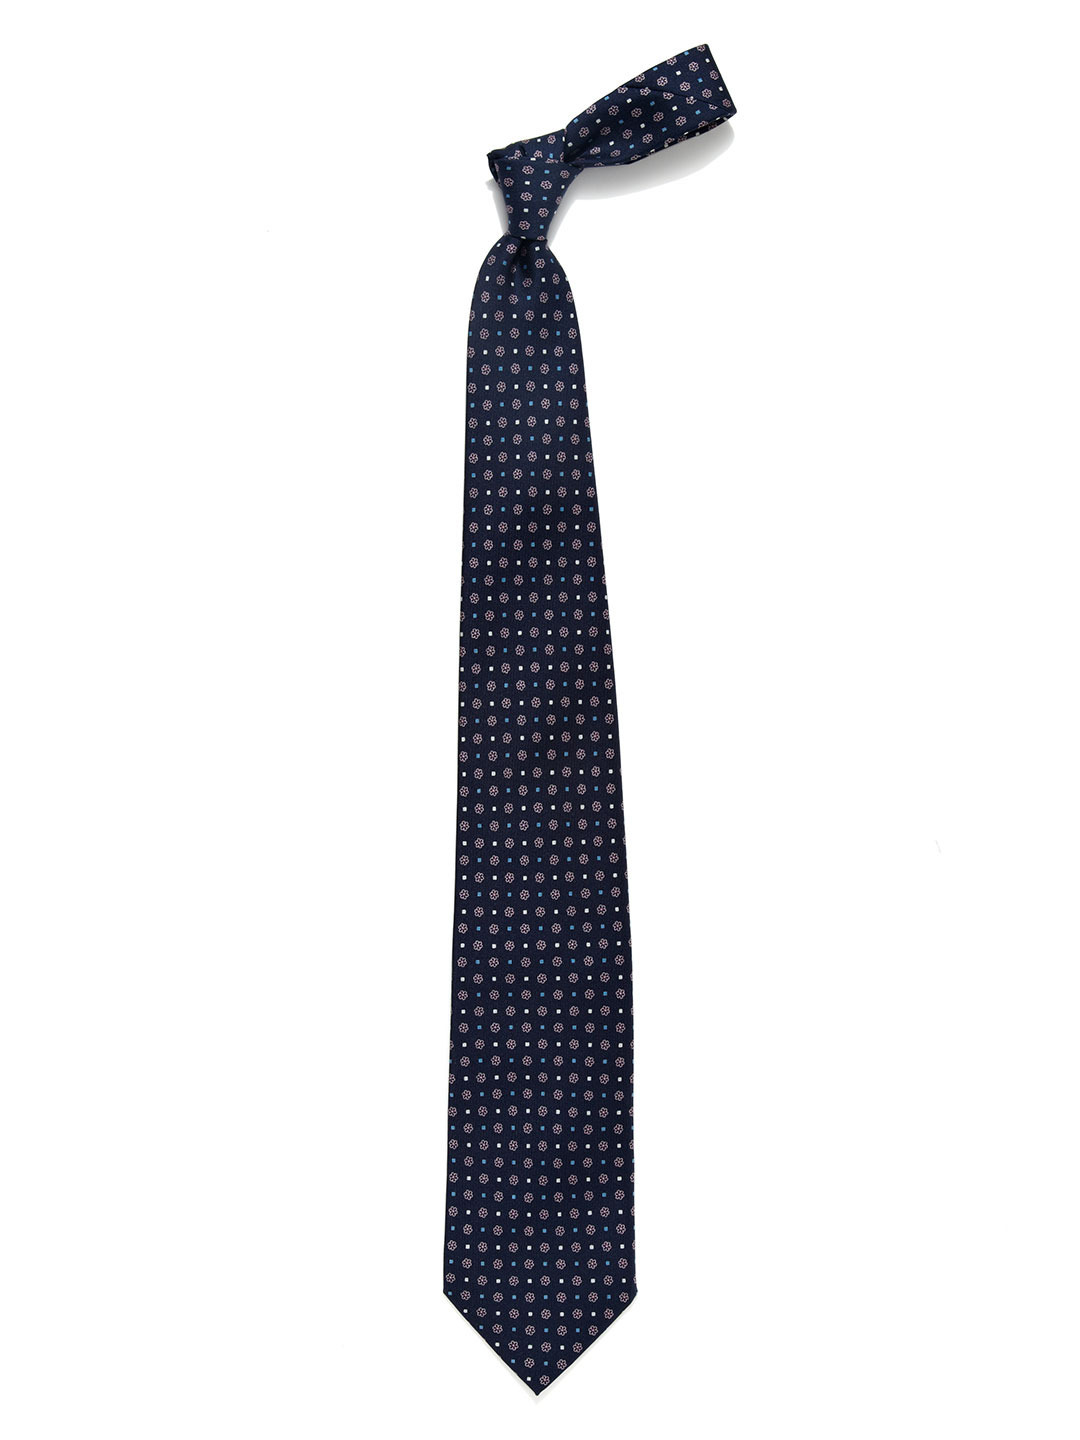 It’s On Sale: E. Marinella and Drake’s Ties